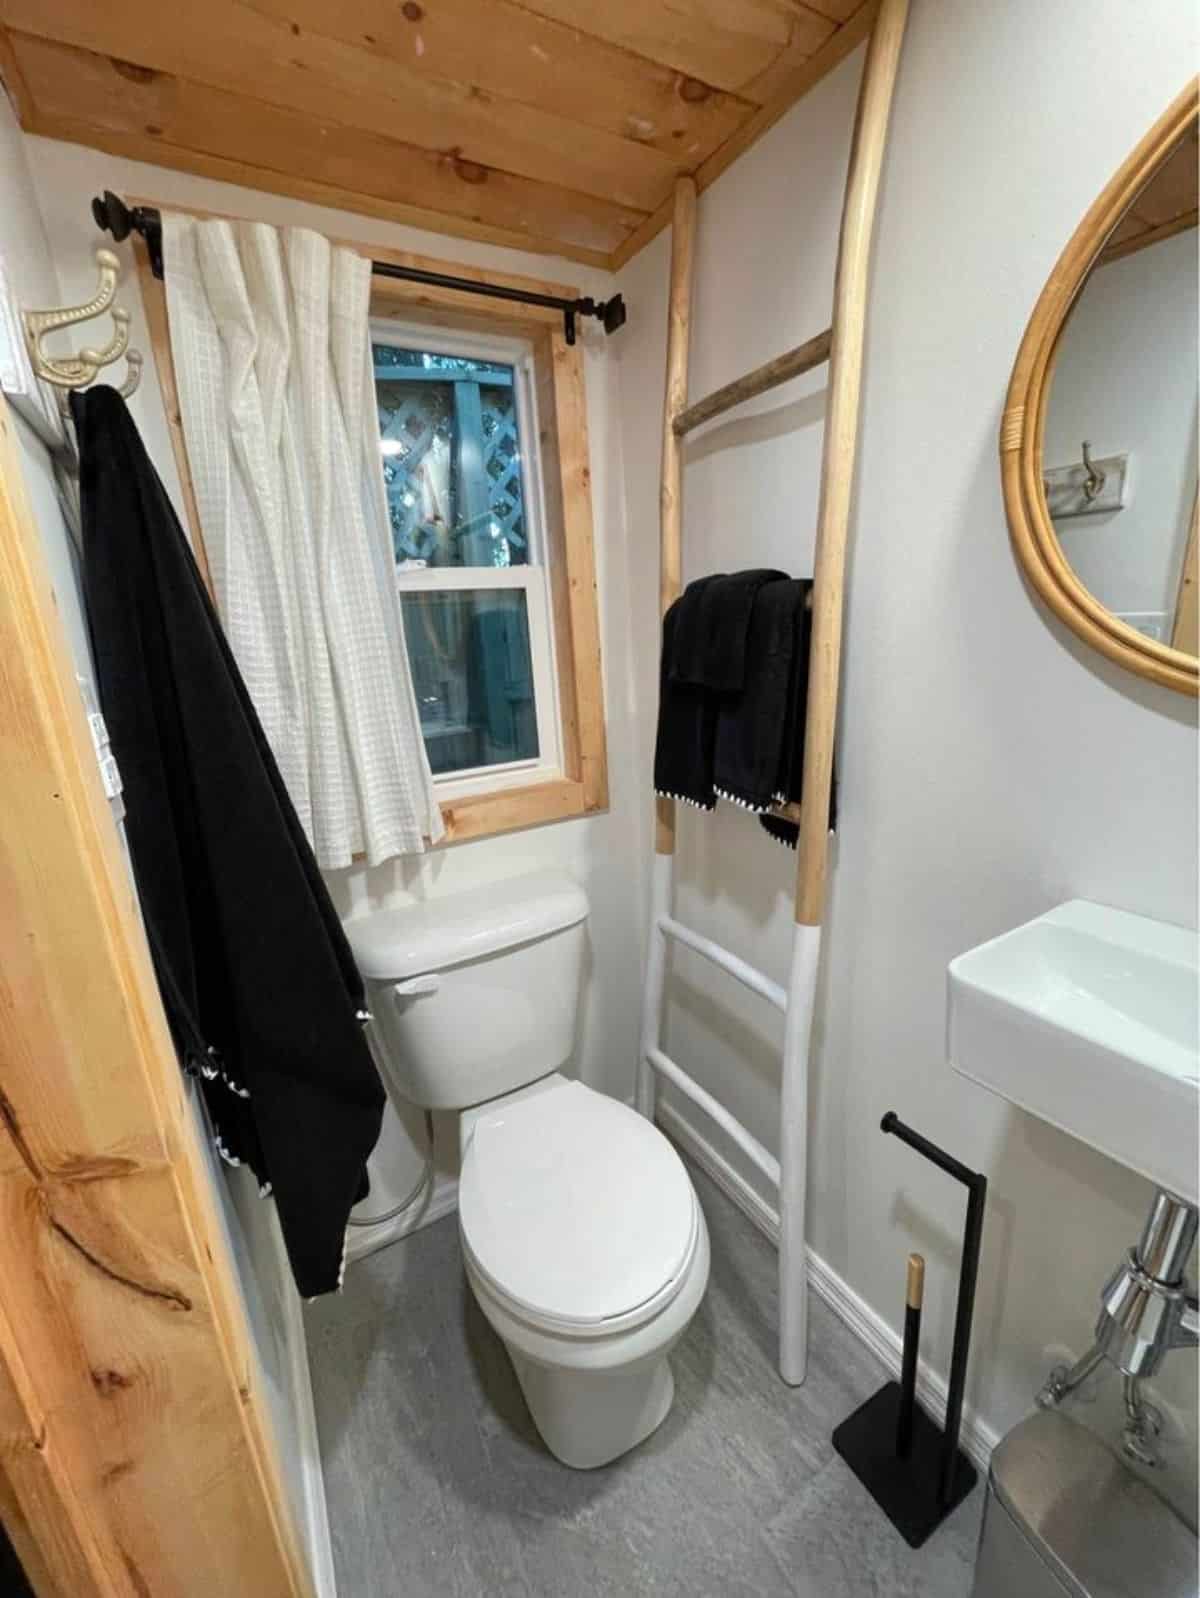 Standard toilet in bathroom of Towable tiny house